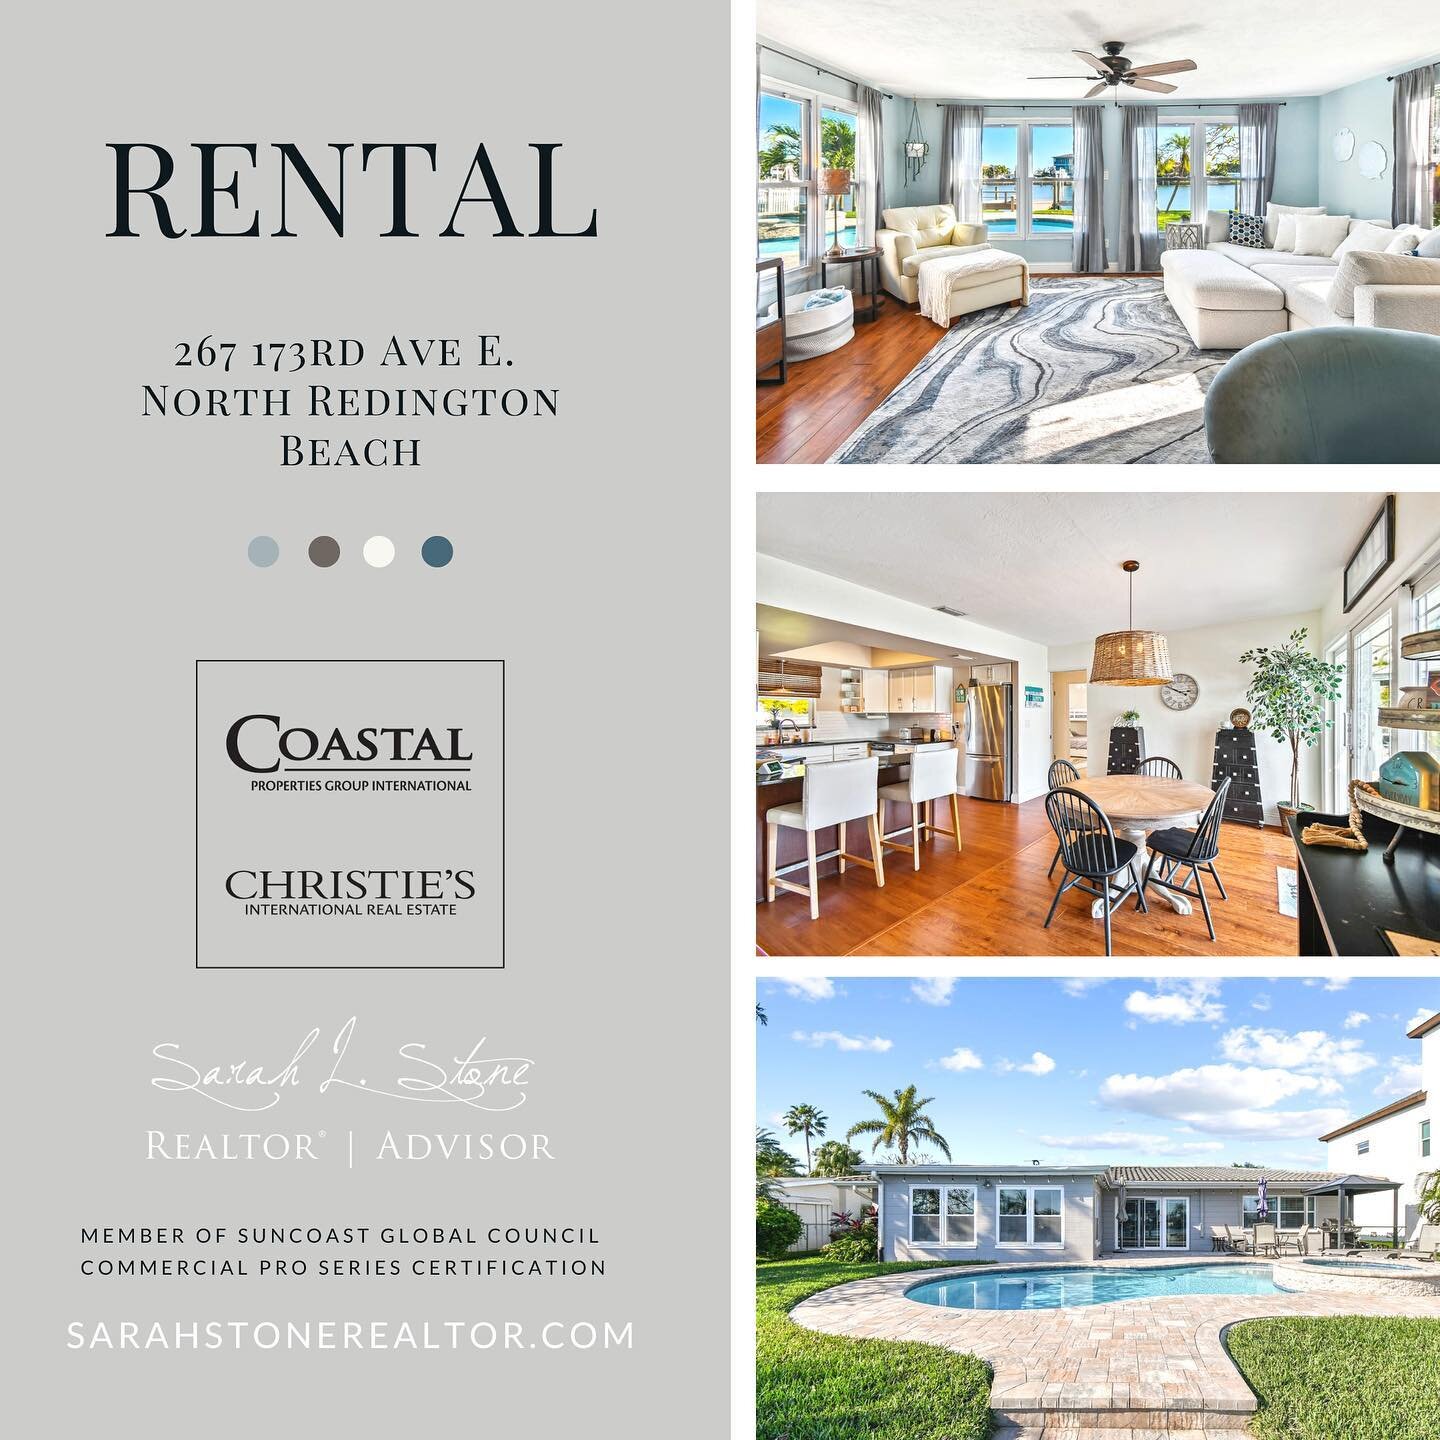 Vacation Rental | North Redington Beach - welcome to this cozy, waterfront home, situated on a secluded straight within walking distance to the sand beaches and warm Gulf waters. Open floor plan with lots of natural light and enough space for your fa